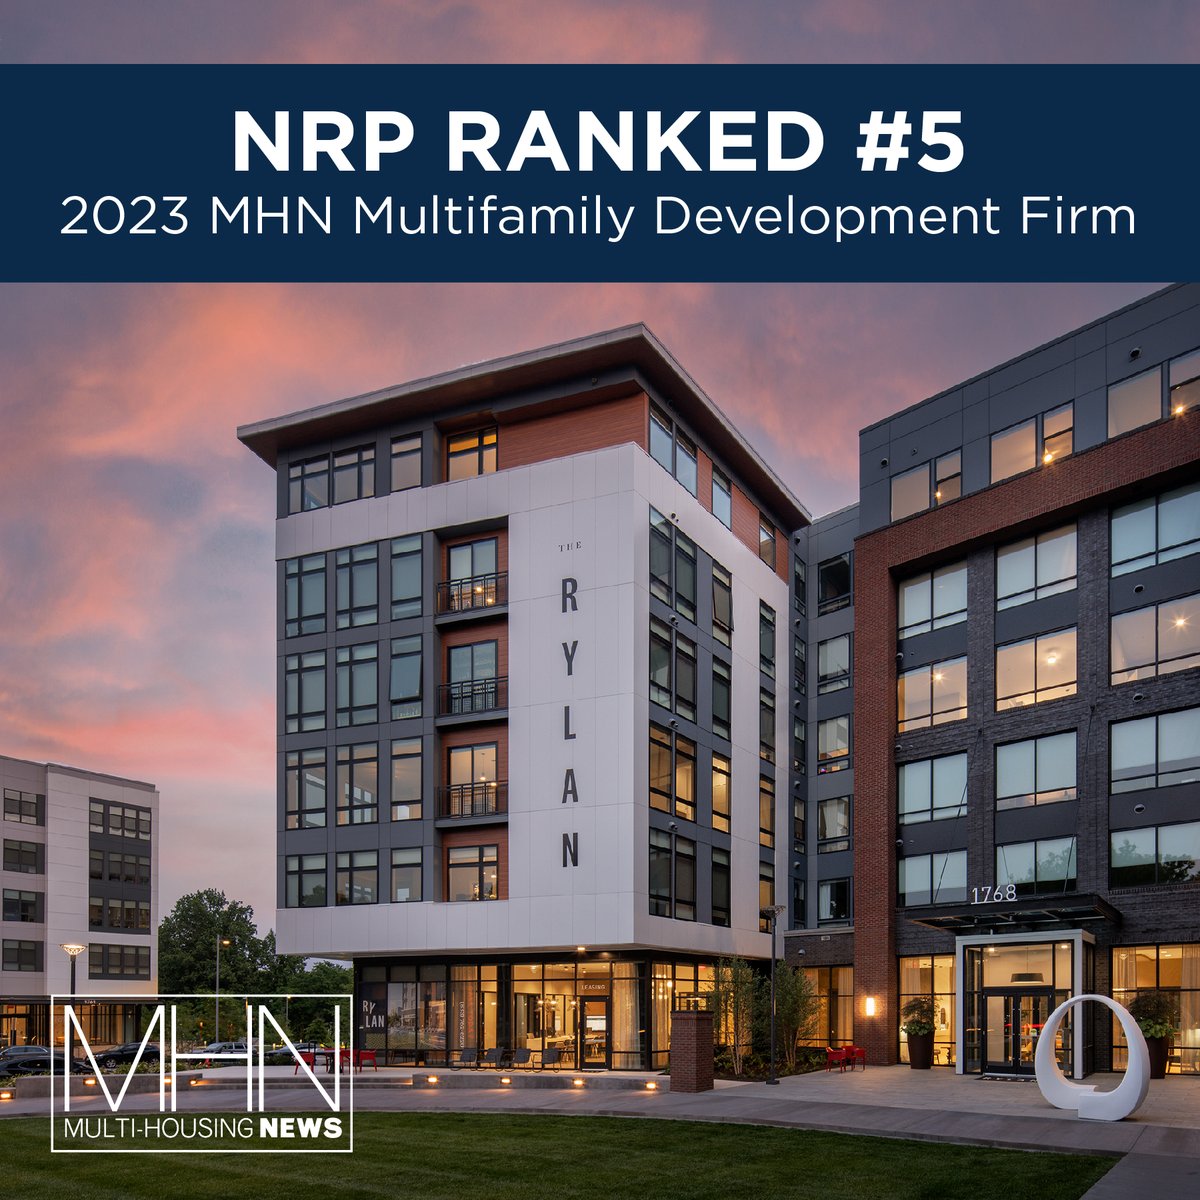 We are extremely proud to rank #5 on Multi-Housing News' 2023 Top Multifamily Development Firms for the second year in a row! Congratulations to all of our A+ Players whose hard work made this achievement possible. 🏆